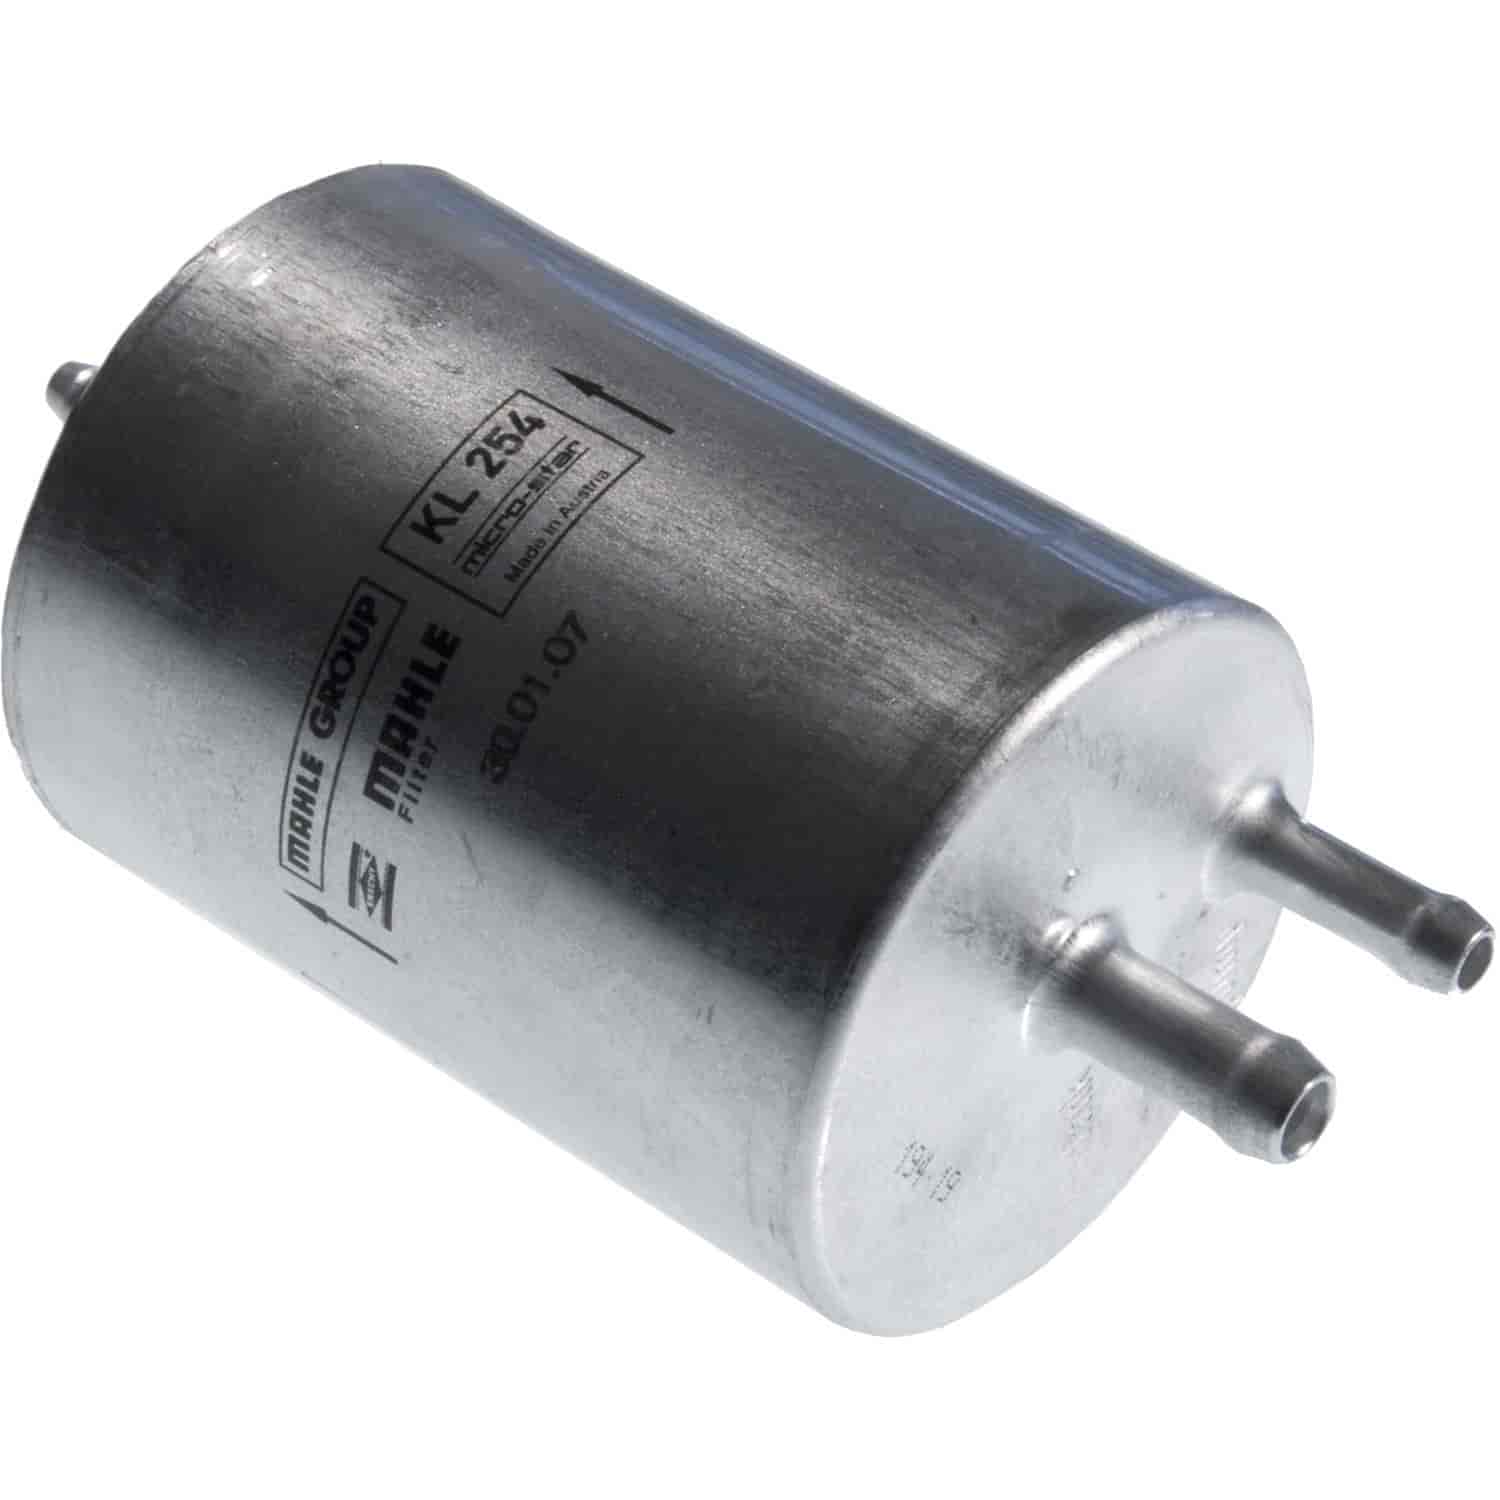 Mahle Fuel Filter MB CL S Class and